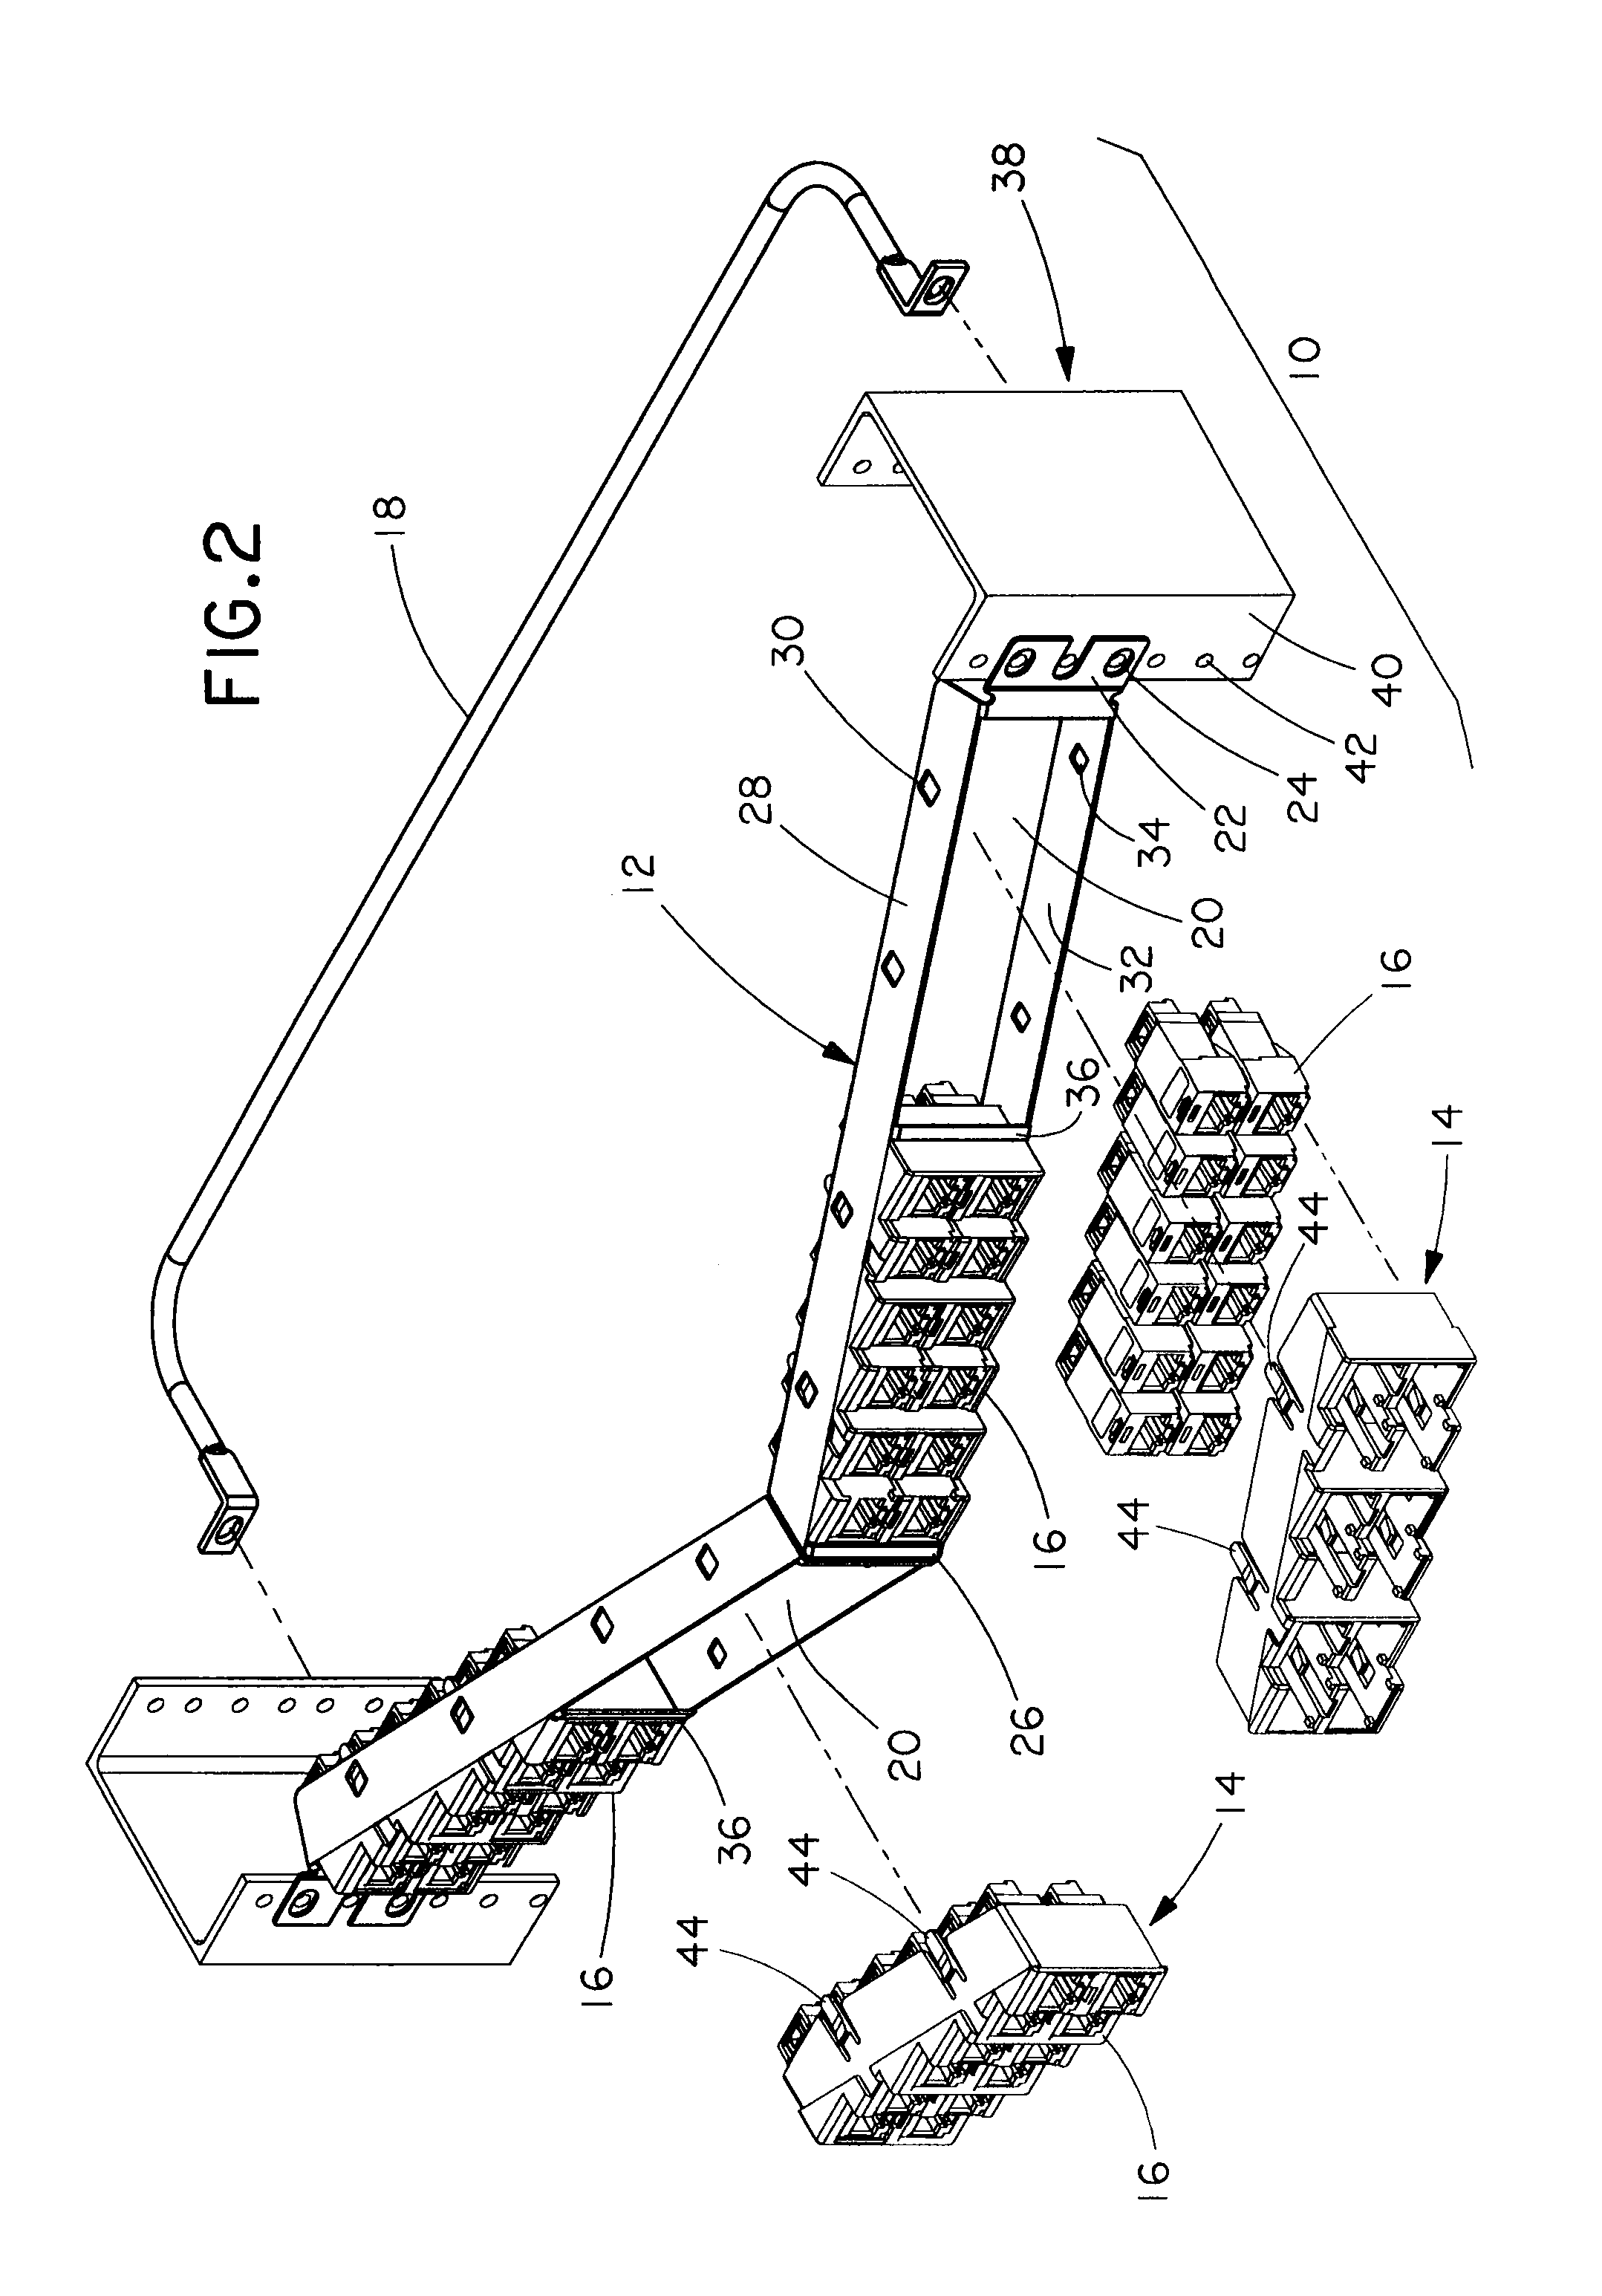 Stair-stepped angled patch panel